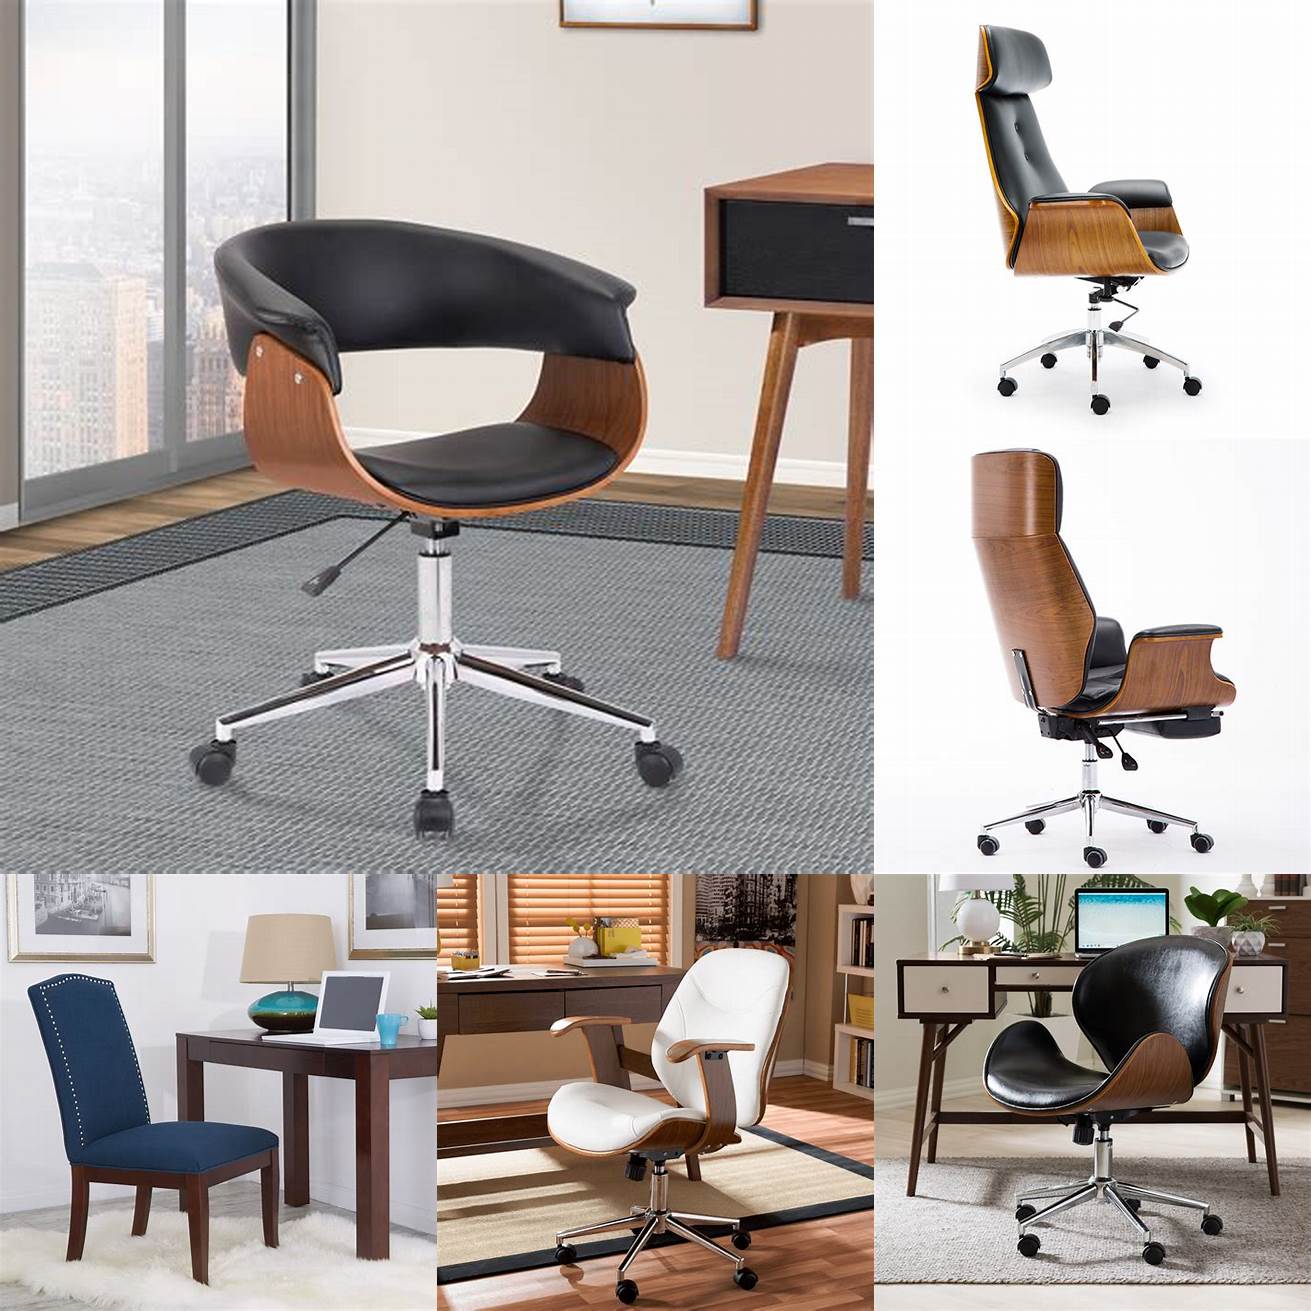 A walnut desk chair can add a touch of sophistication to your home office